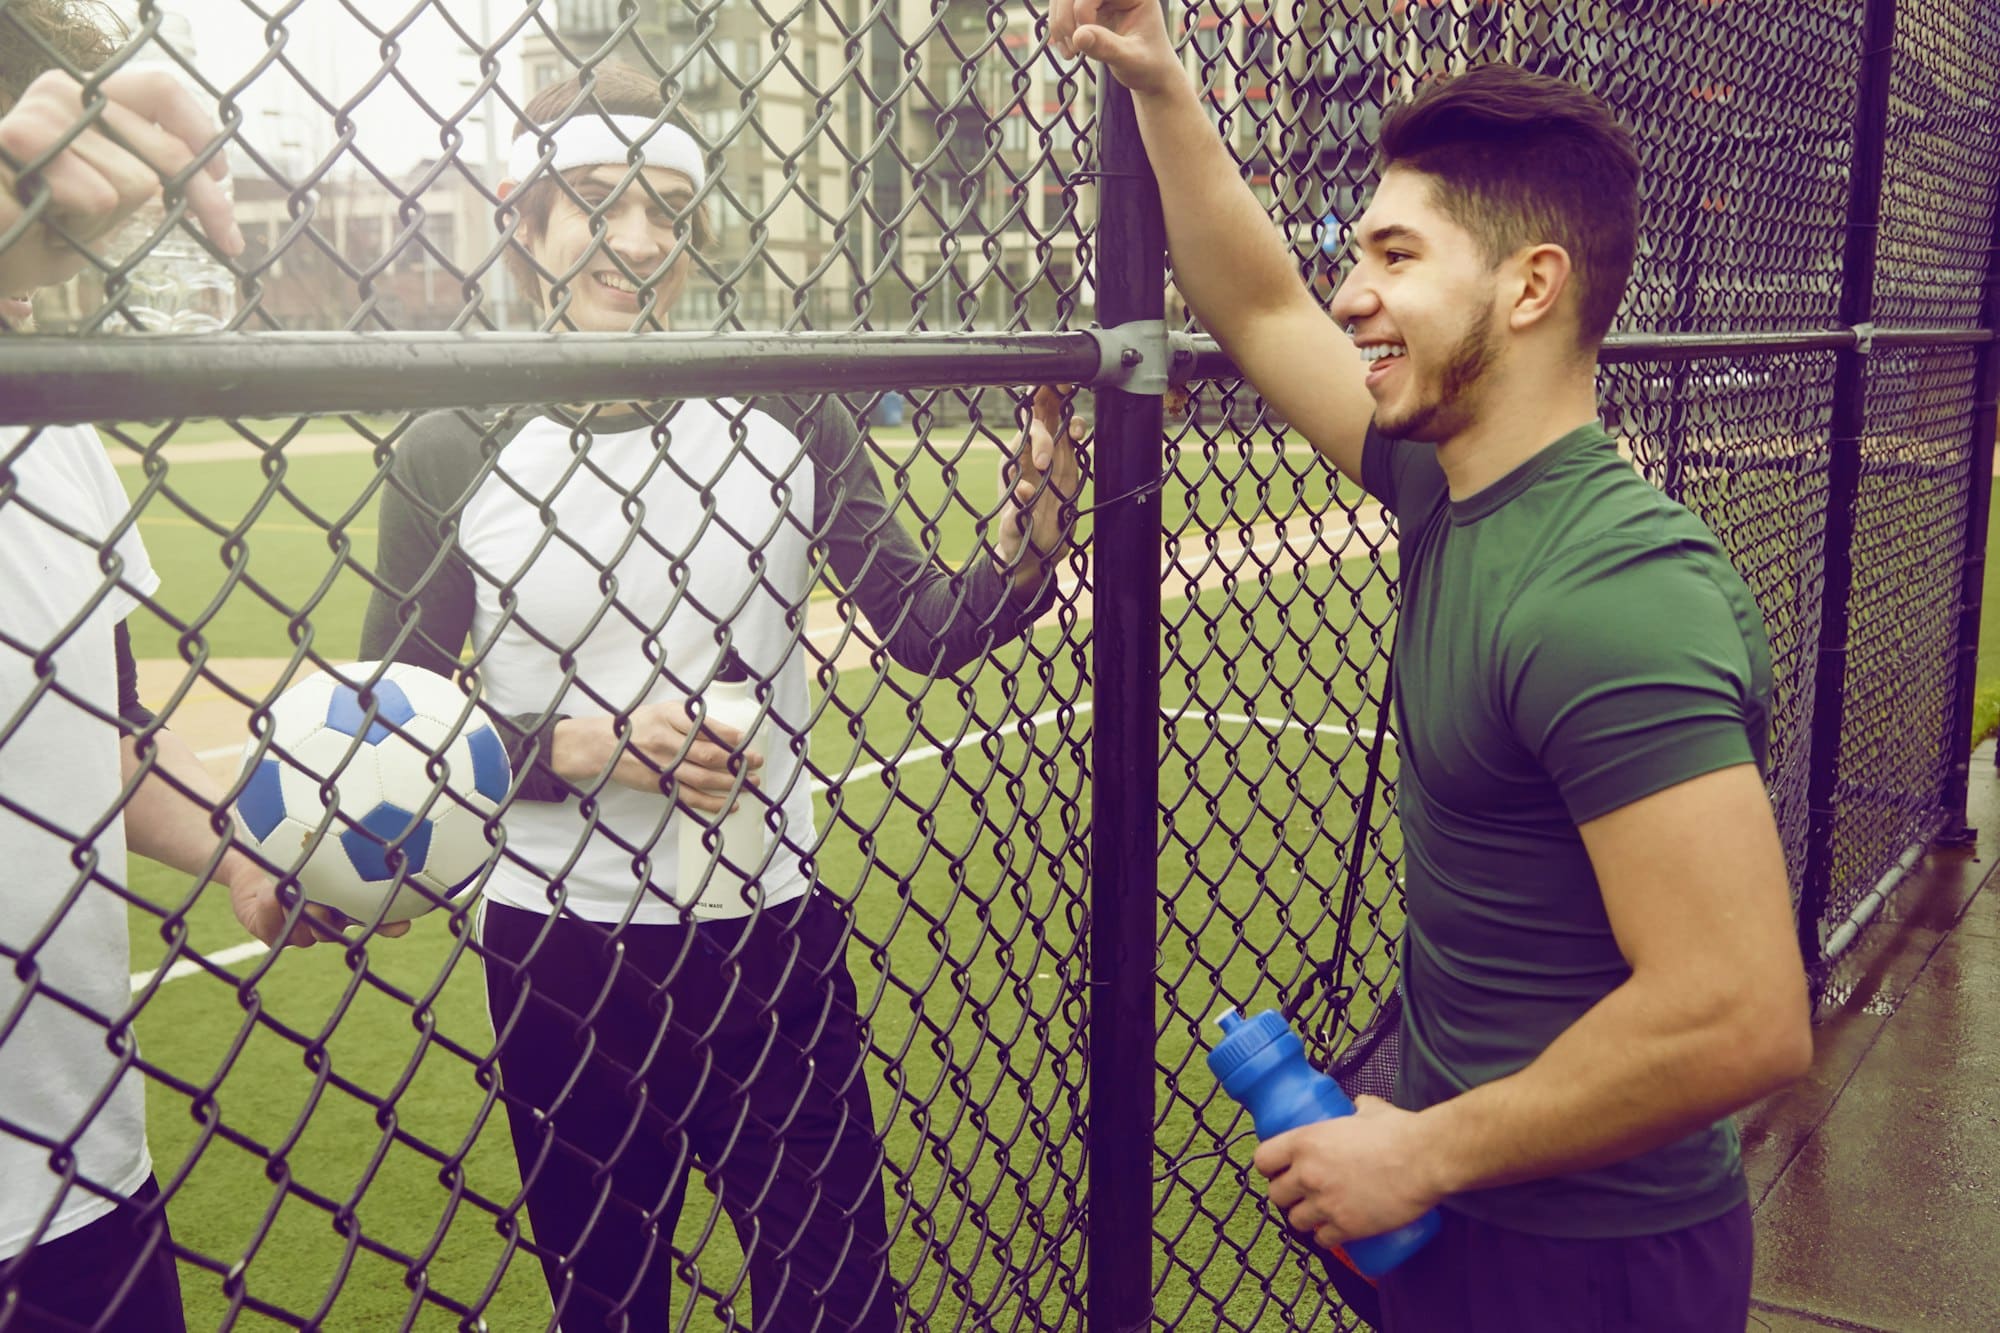 Three male soccer players chatting through wire fence